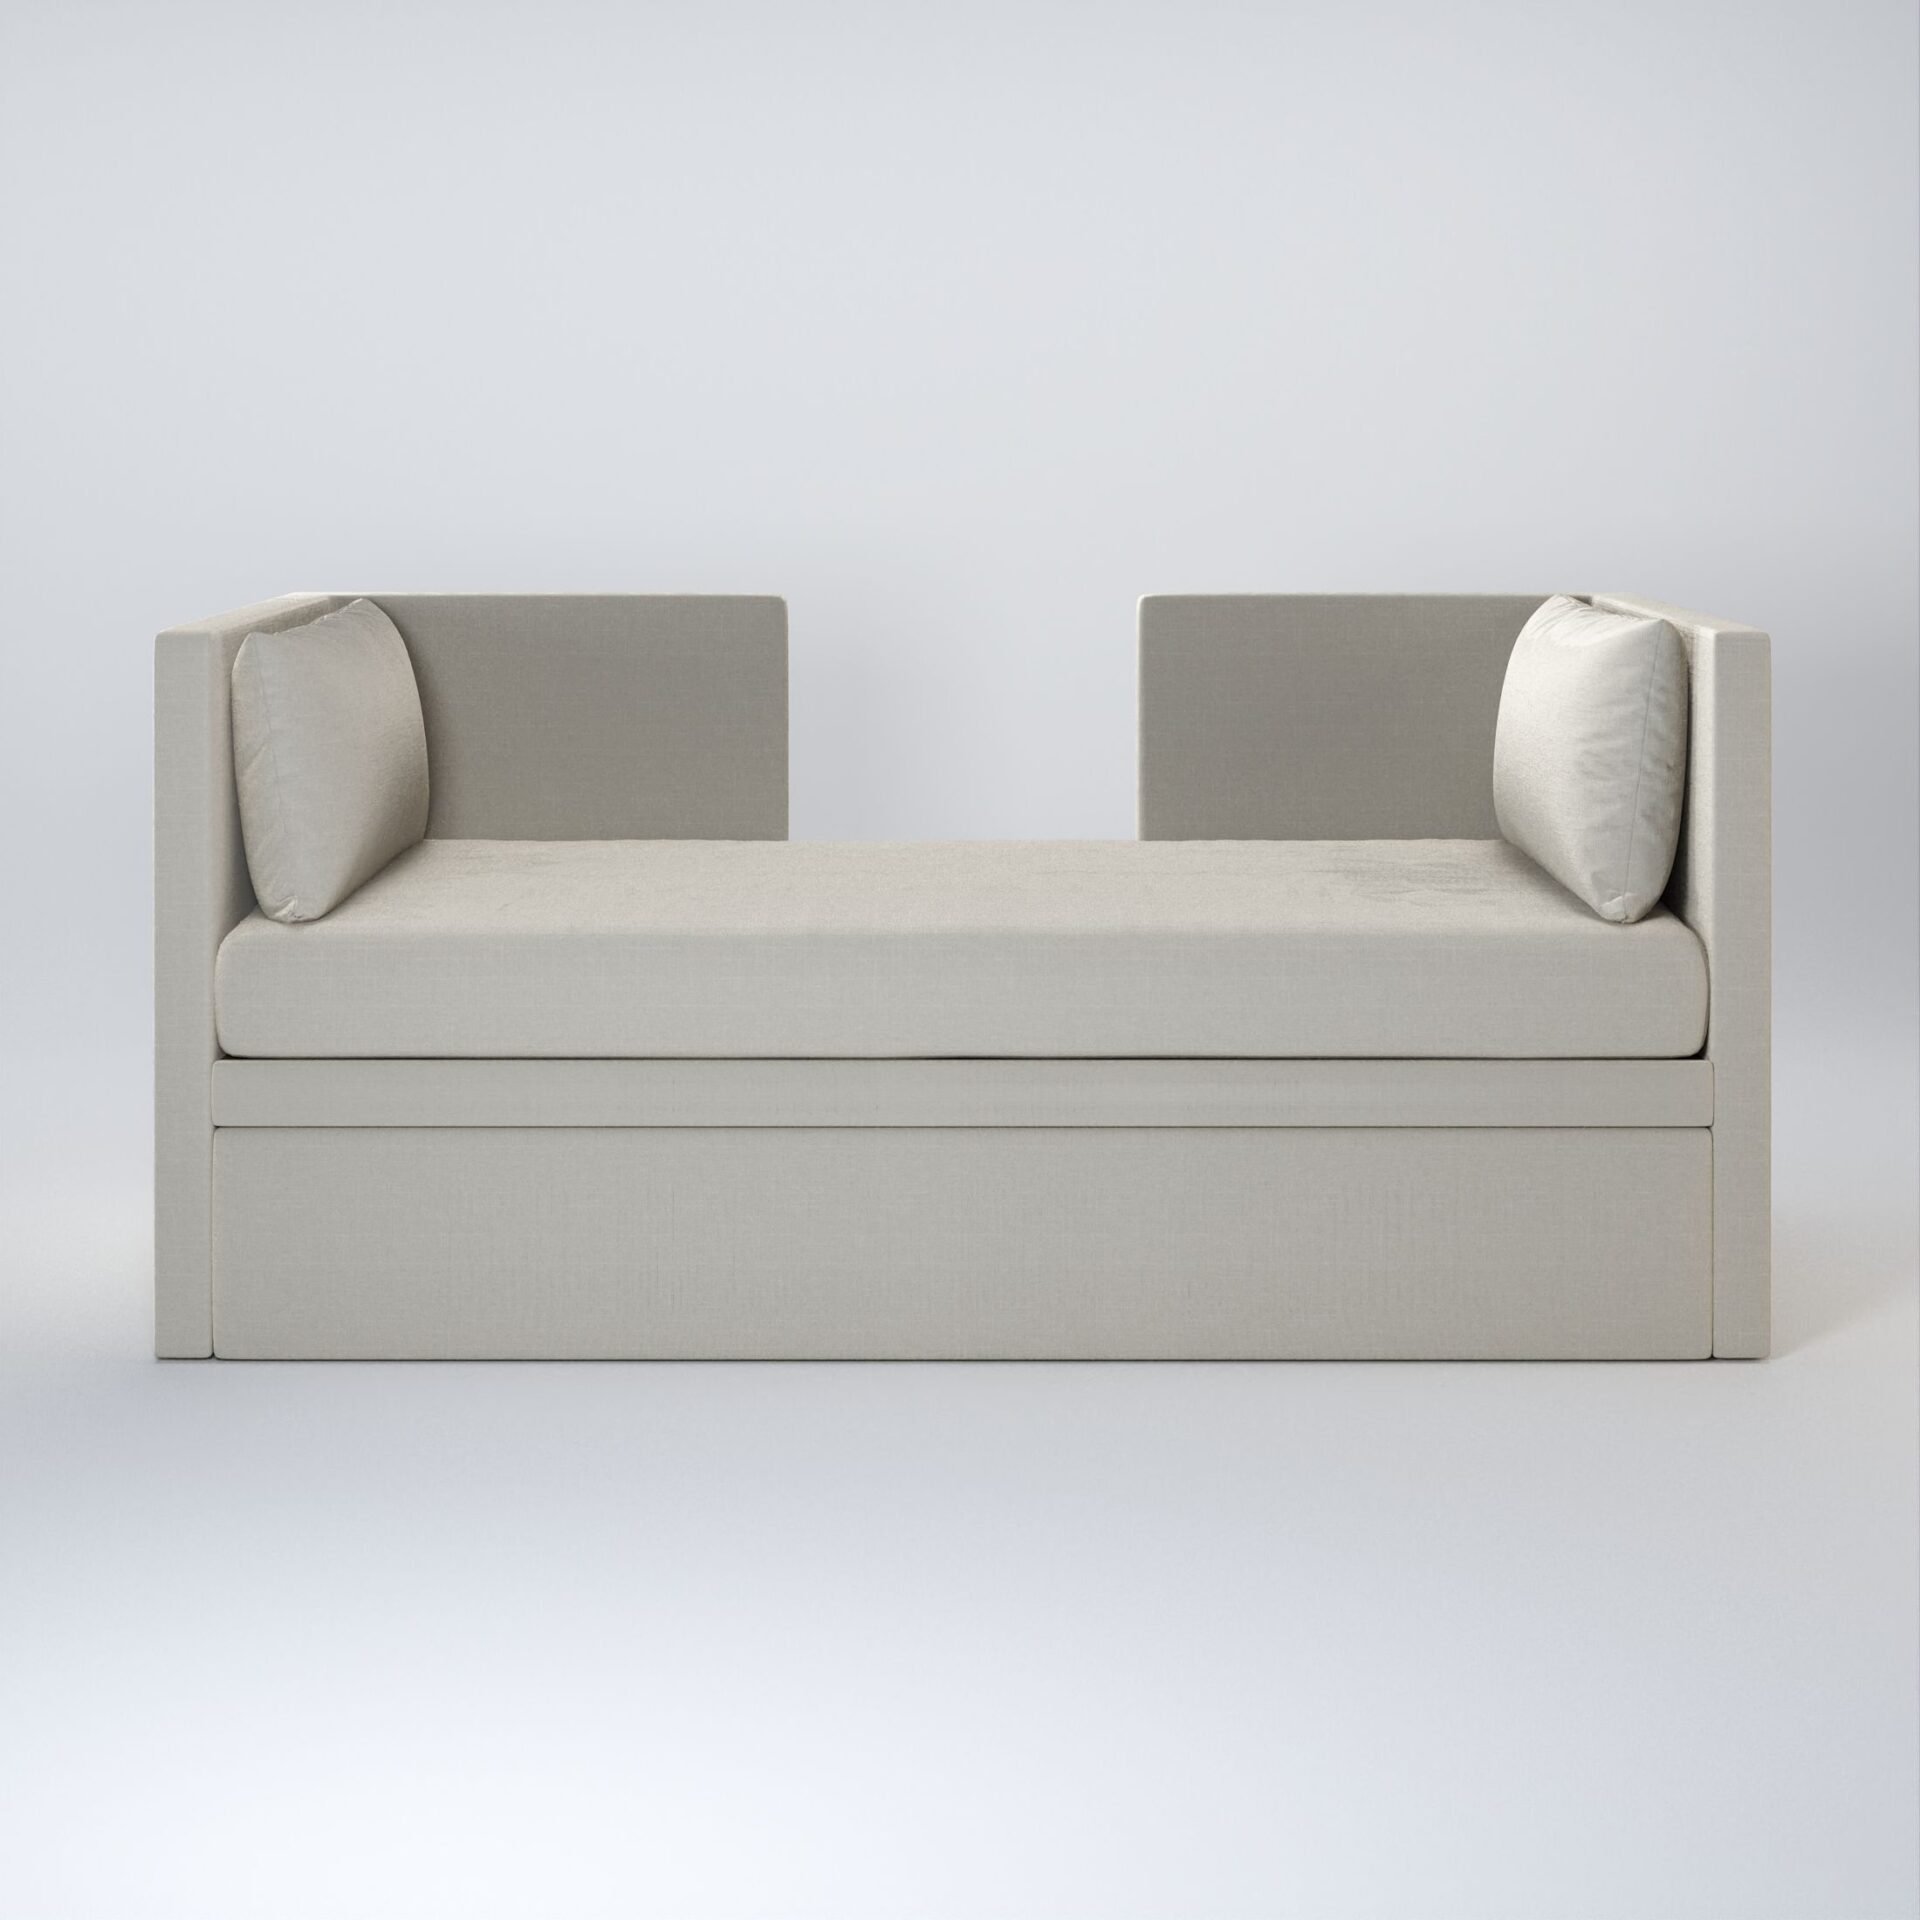 ARDAN | Customizable Daybeds, Trundles, & More